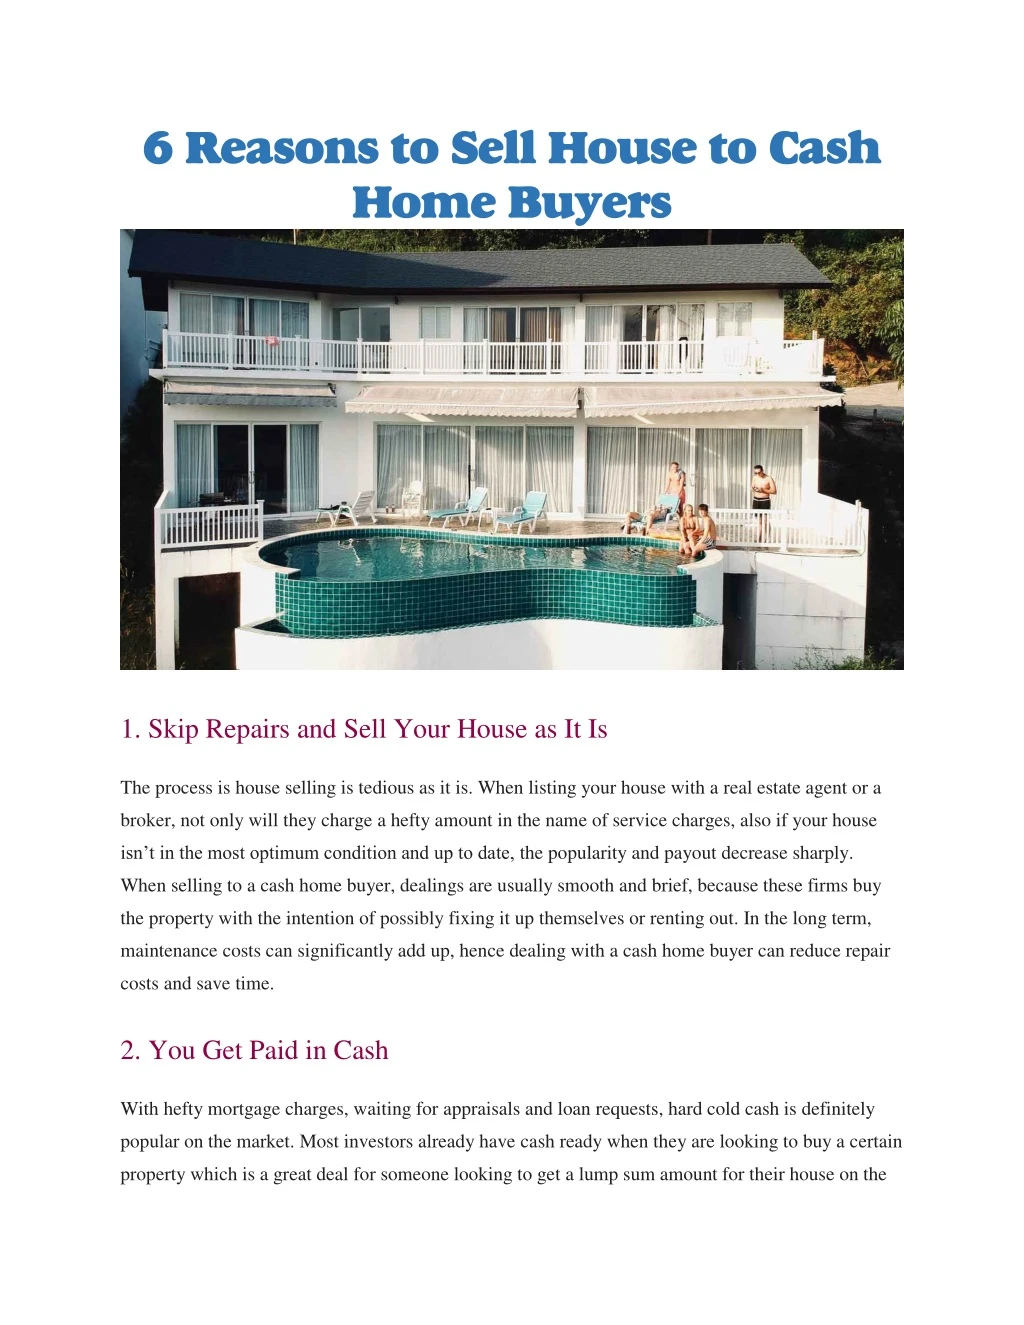 6 reasons to sell house to cash home buyers